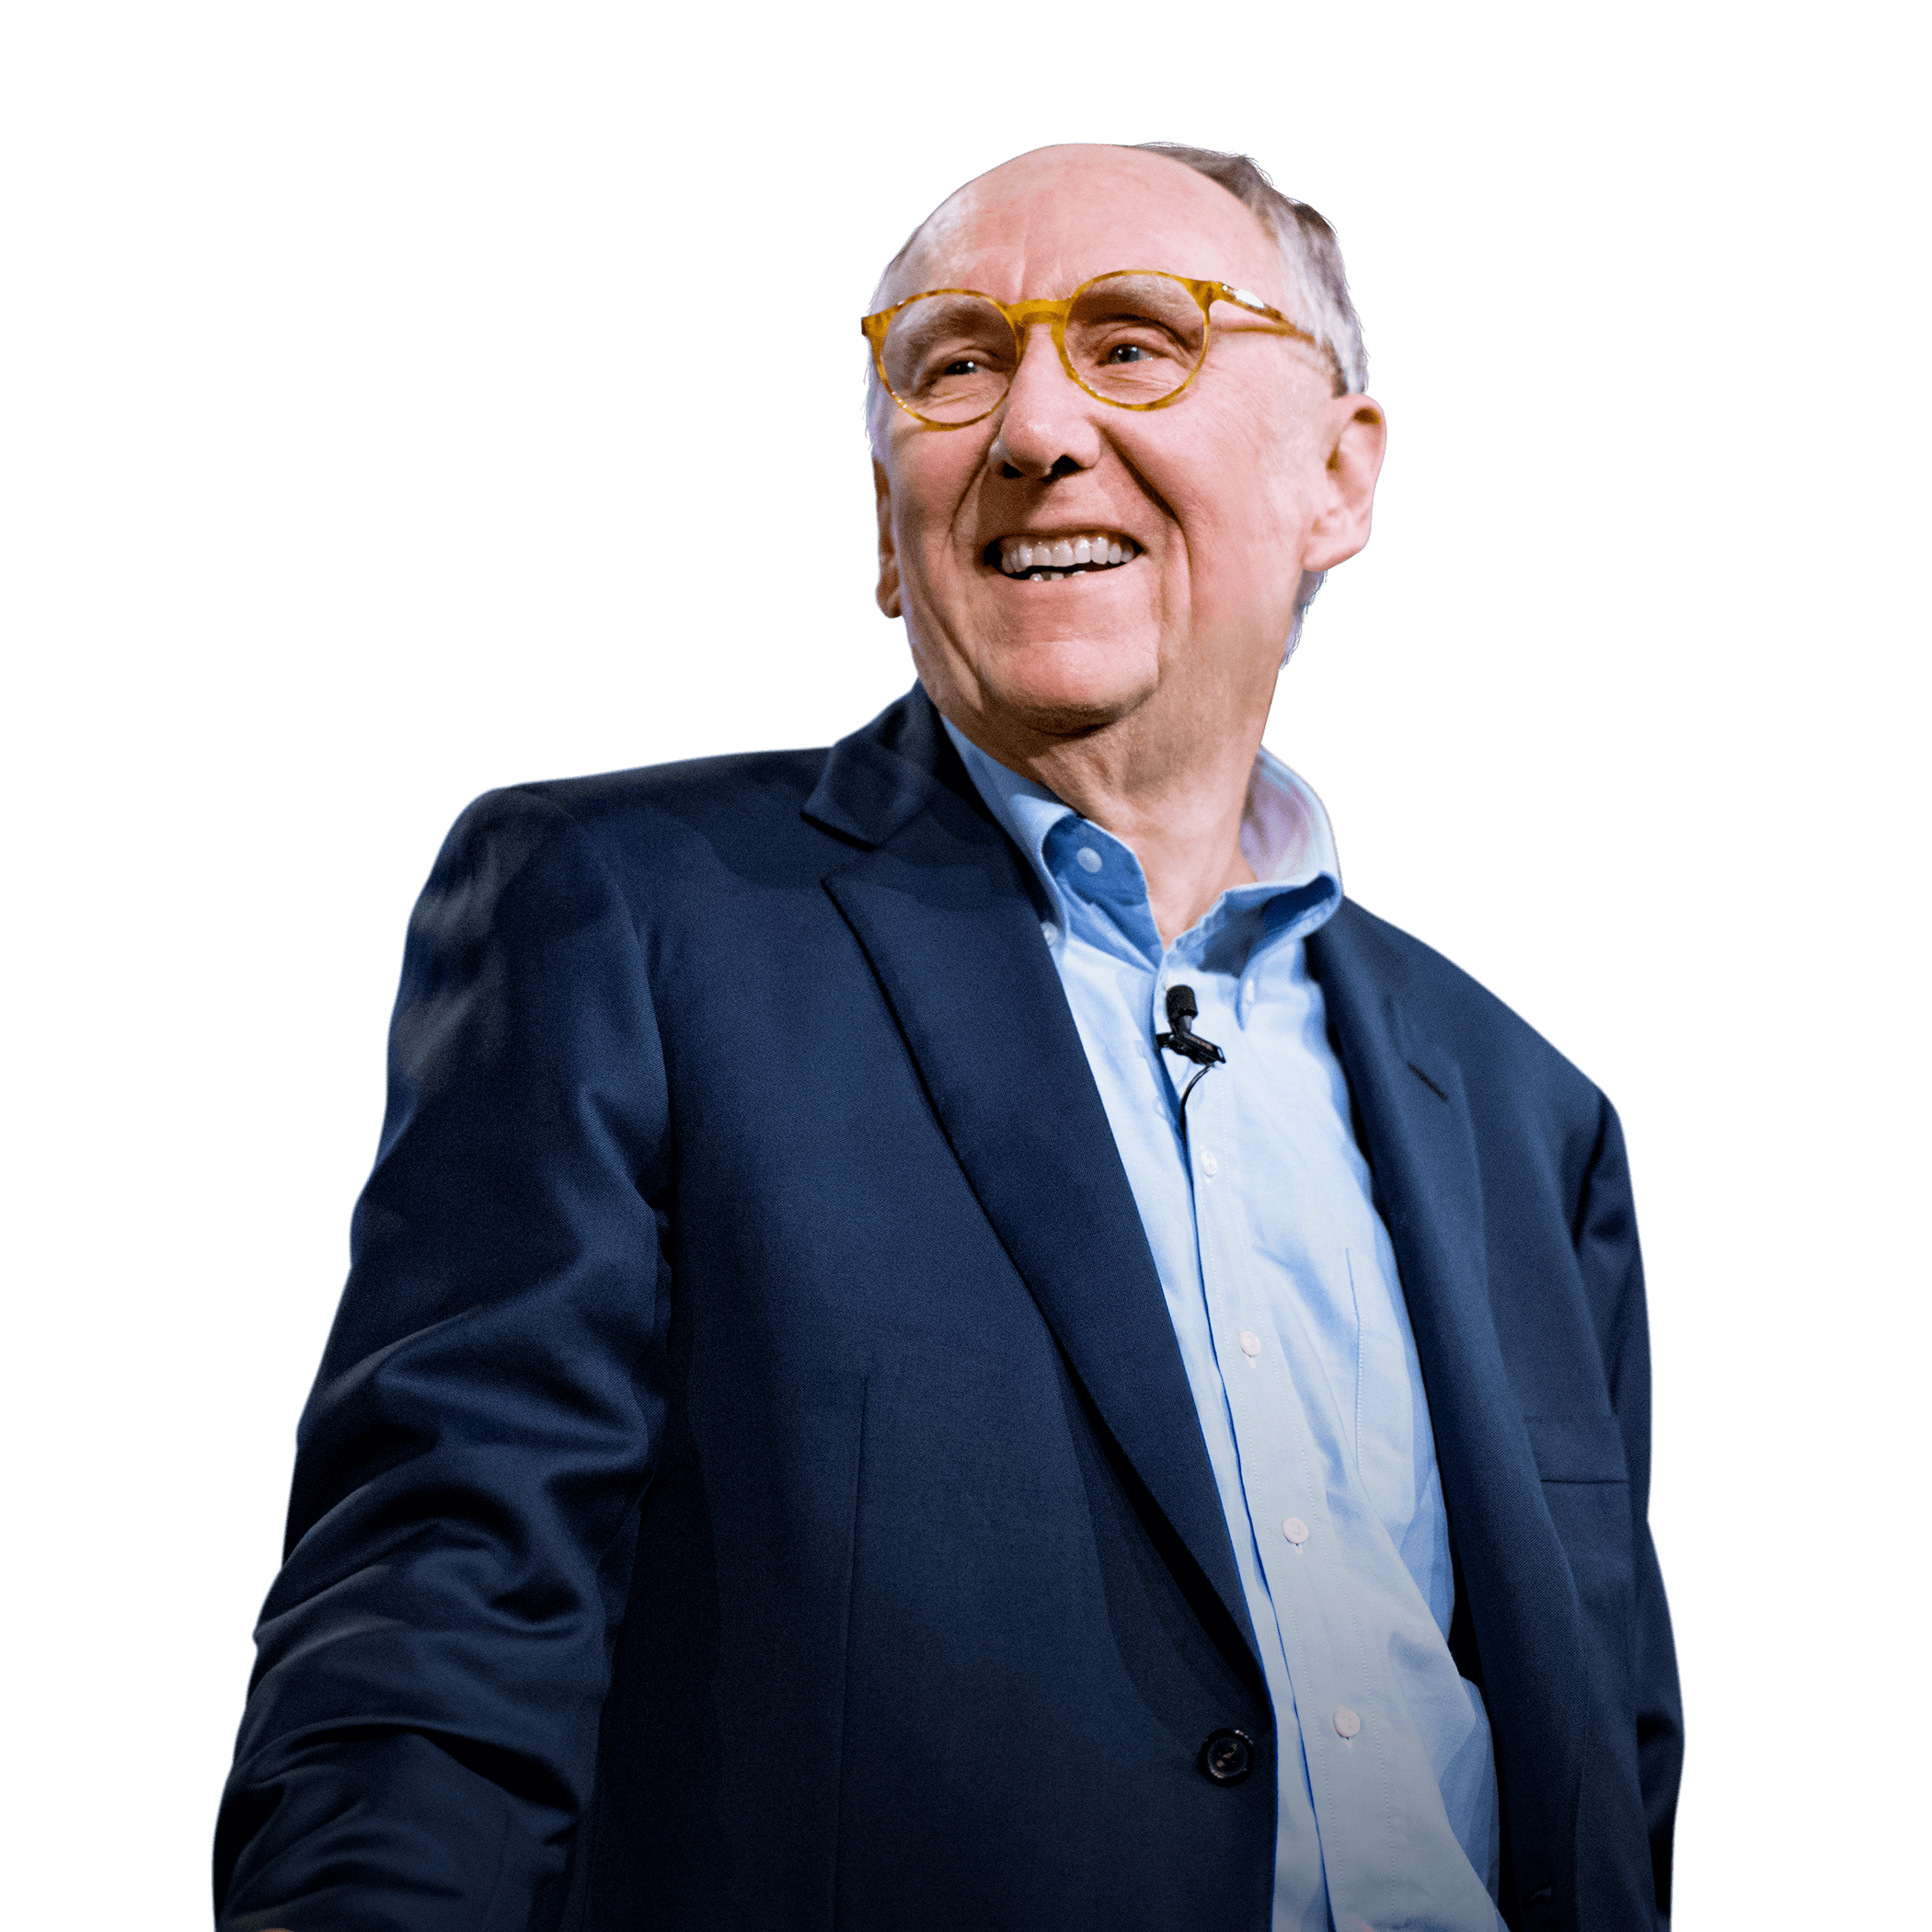 Esri President Jack Dangermond smiling and looking to the left